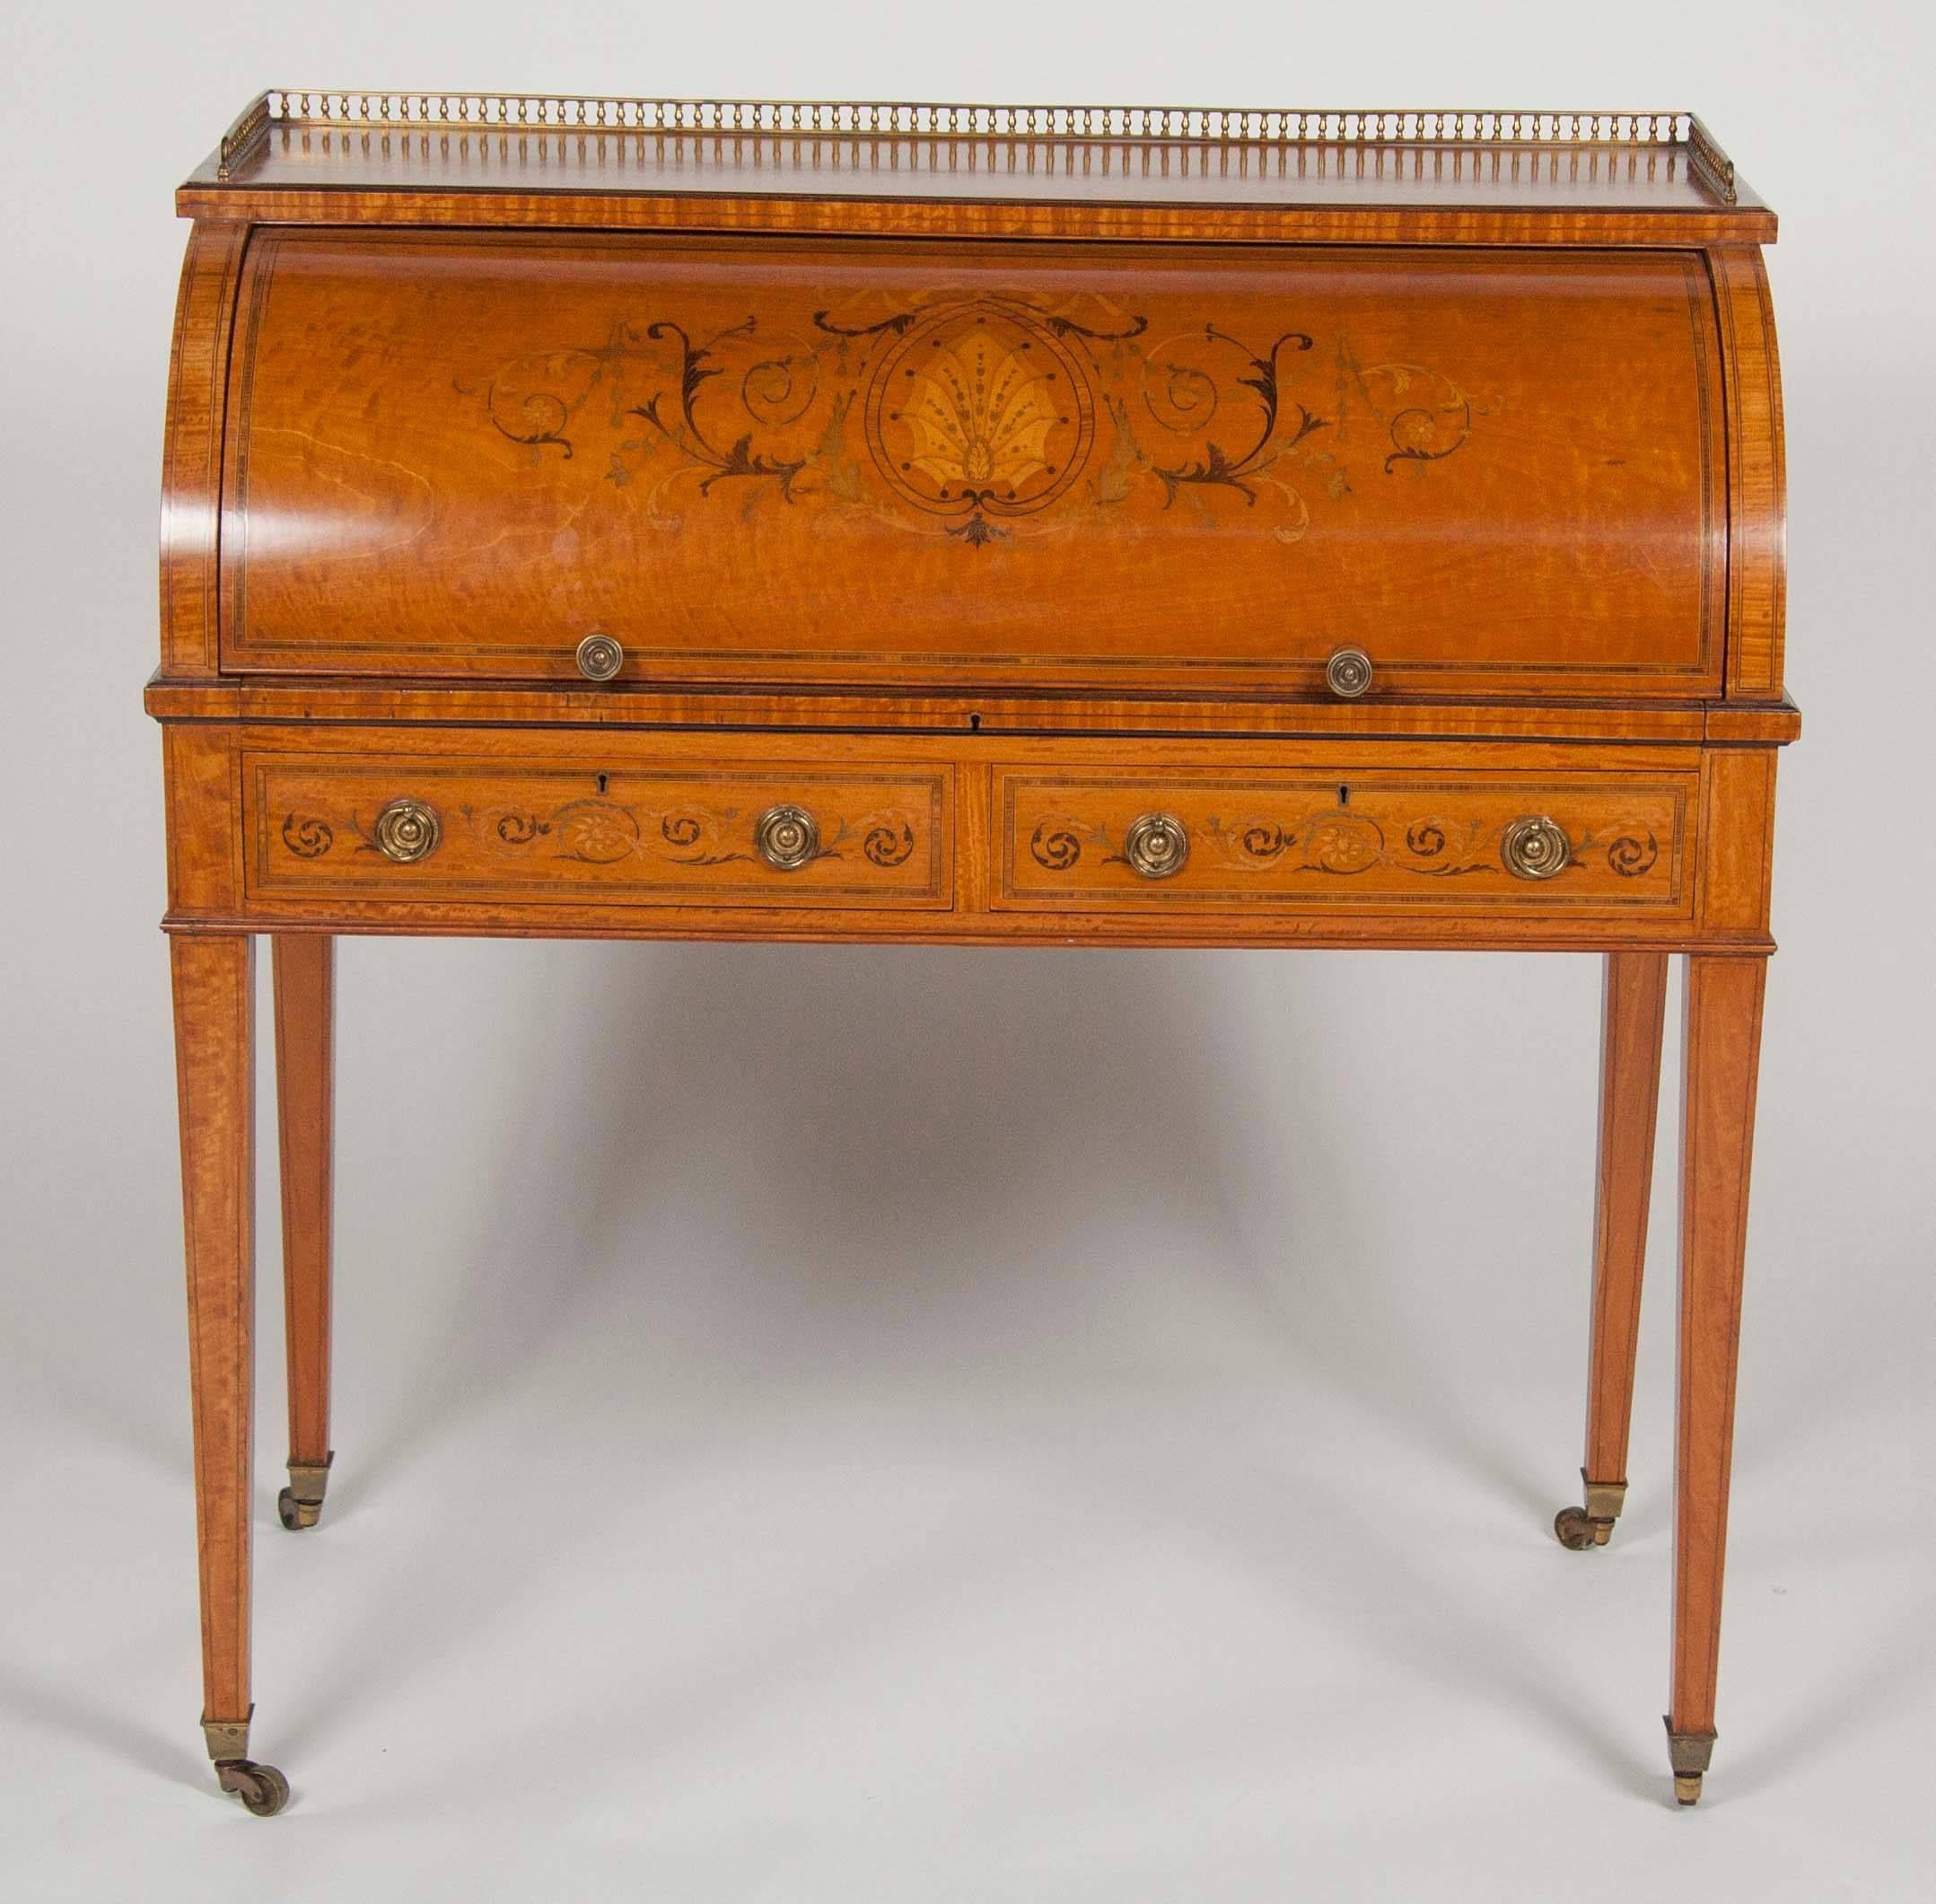 An Edwardian satinwood marquetry inlaid cylinder desk by W.J Mansell.